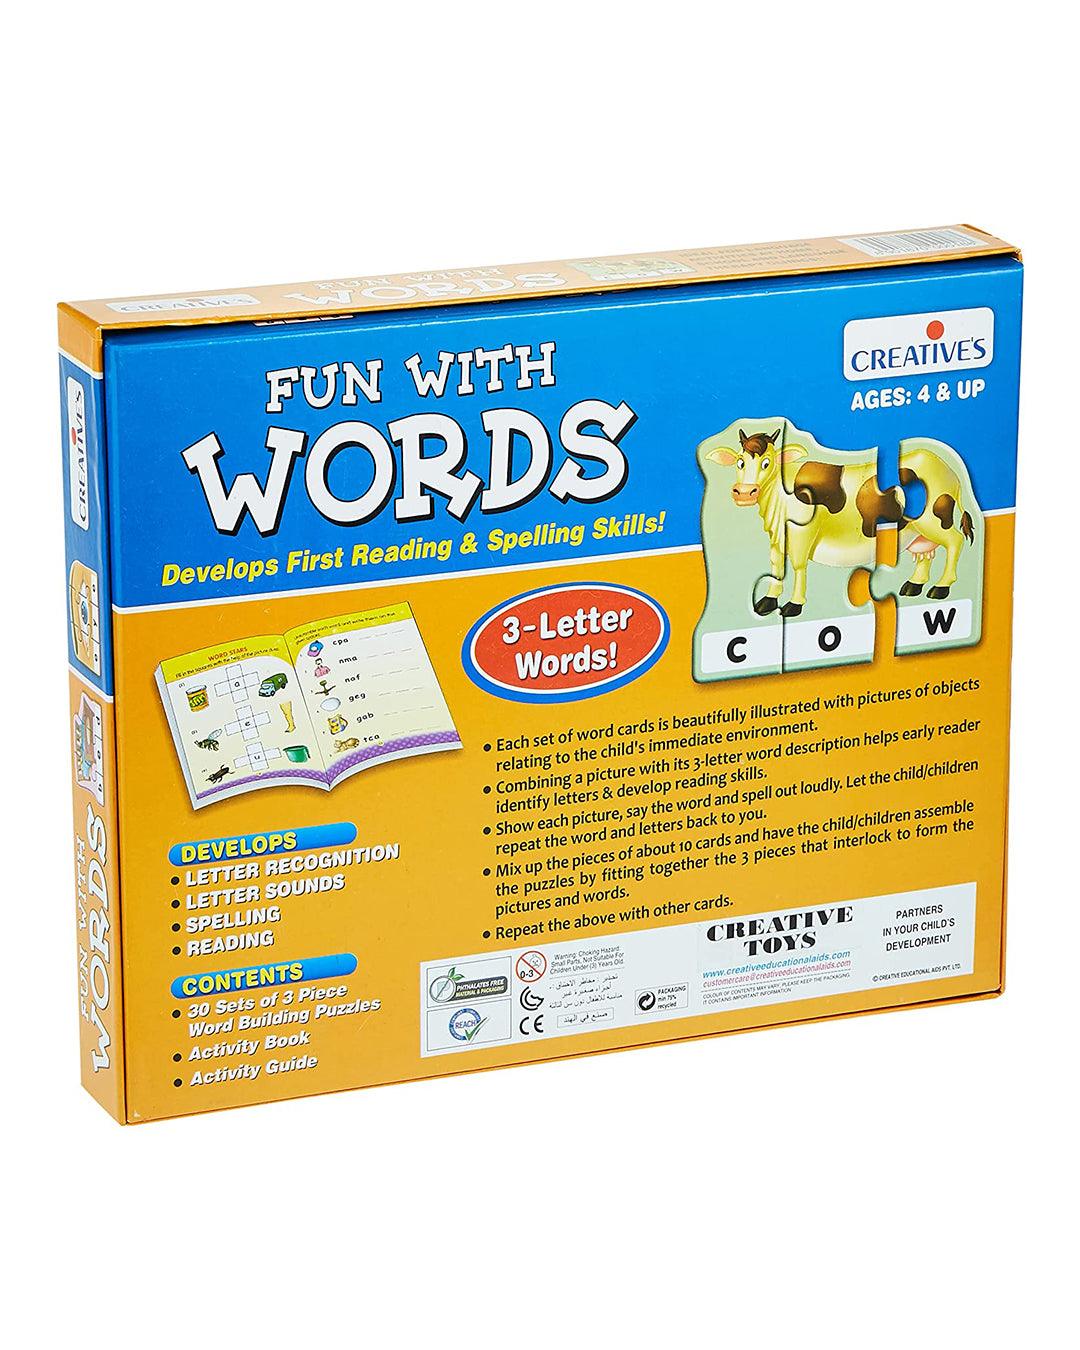 Creative Fun With Words for Pre School Kids - For Child Age 4 & Up - MARKET 99